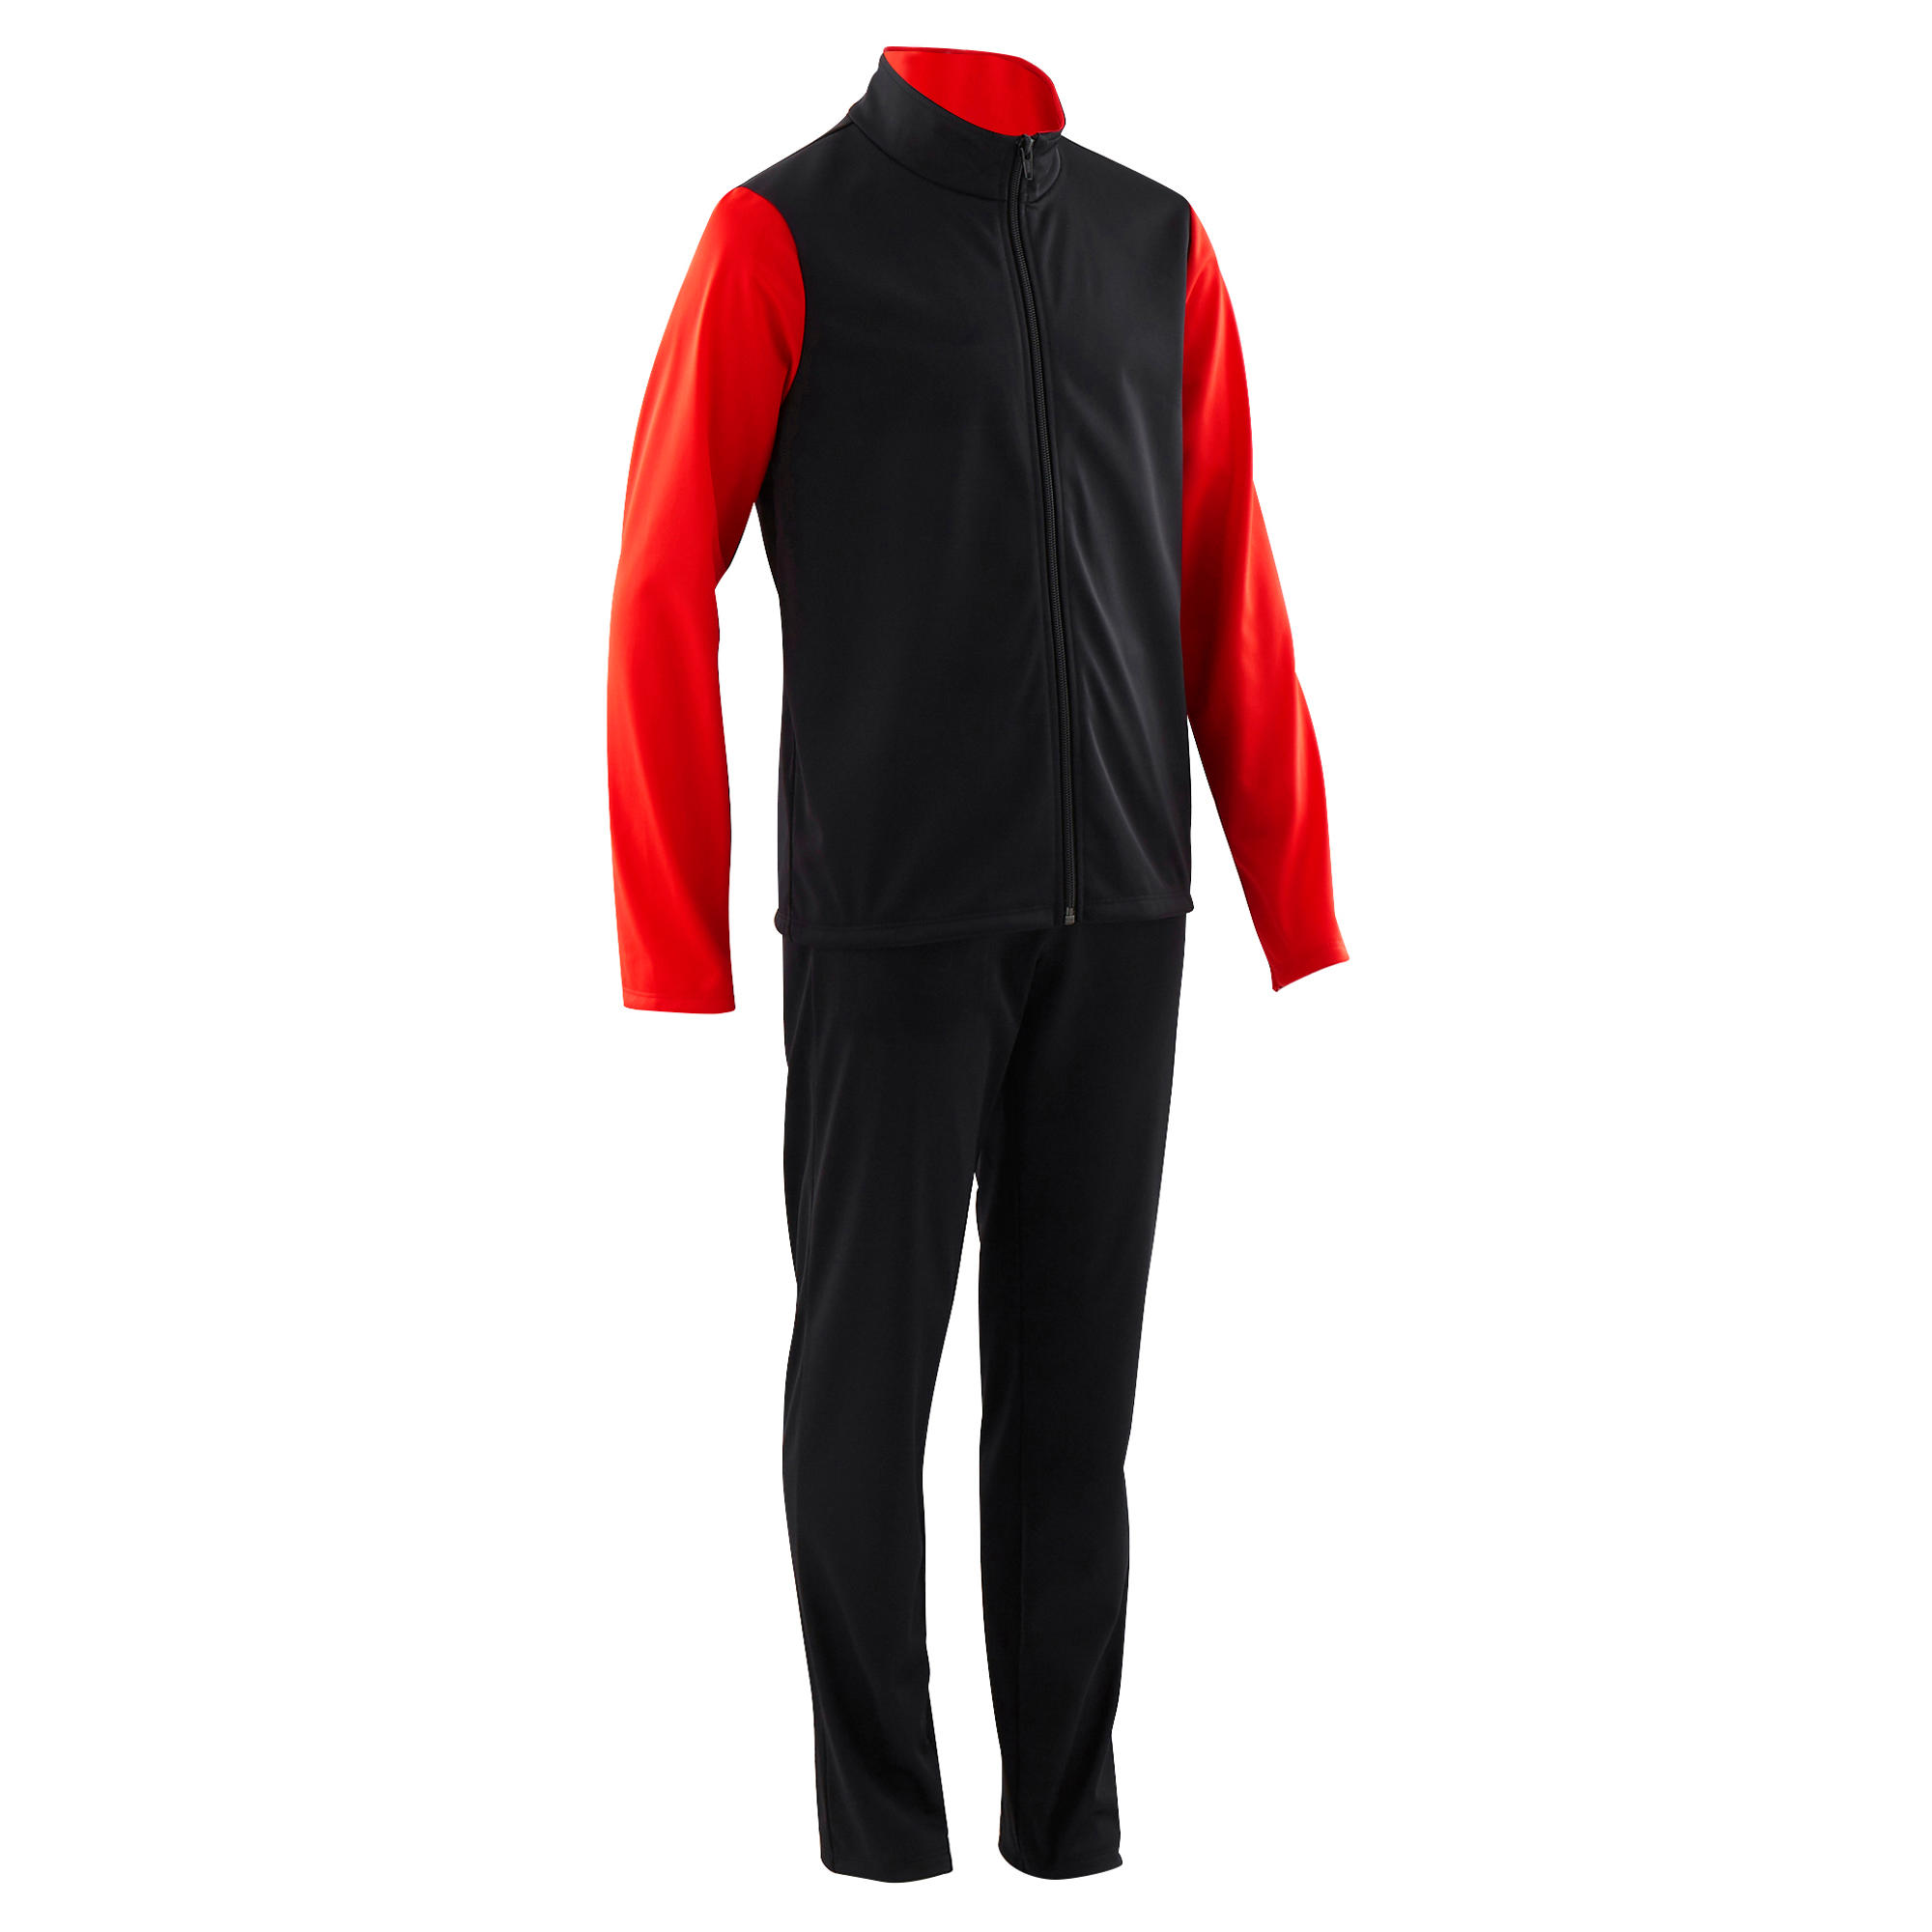 DOMYOS Kids' Breathable Synthetic Tracksuit Gym'y Basic - Black/Red